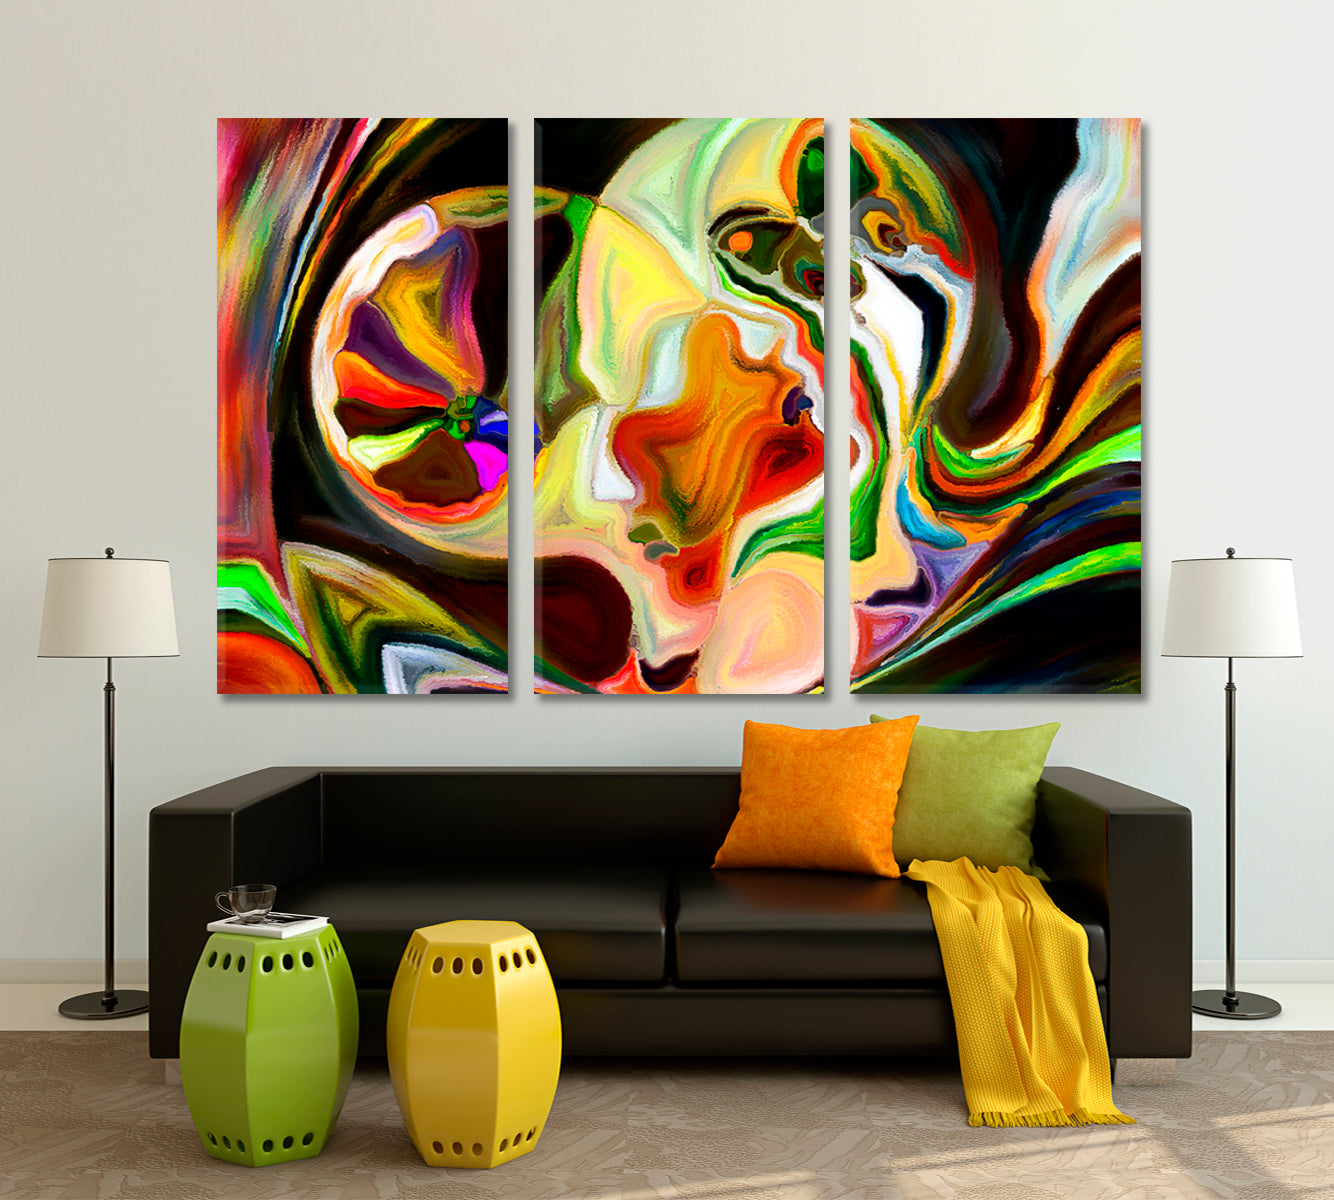 CONTEMPORARY ART Abstract Forms and Nature Lines Contemporary Art Artesty 3 panels 36" x 24" 